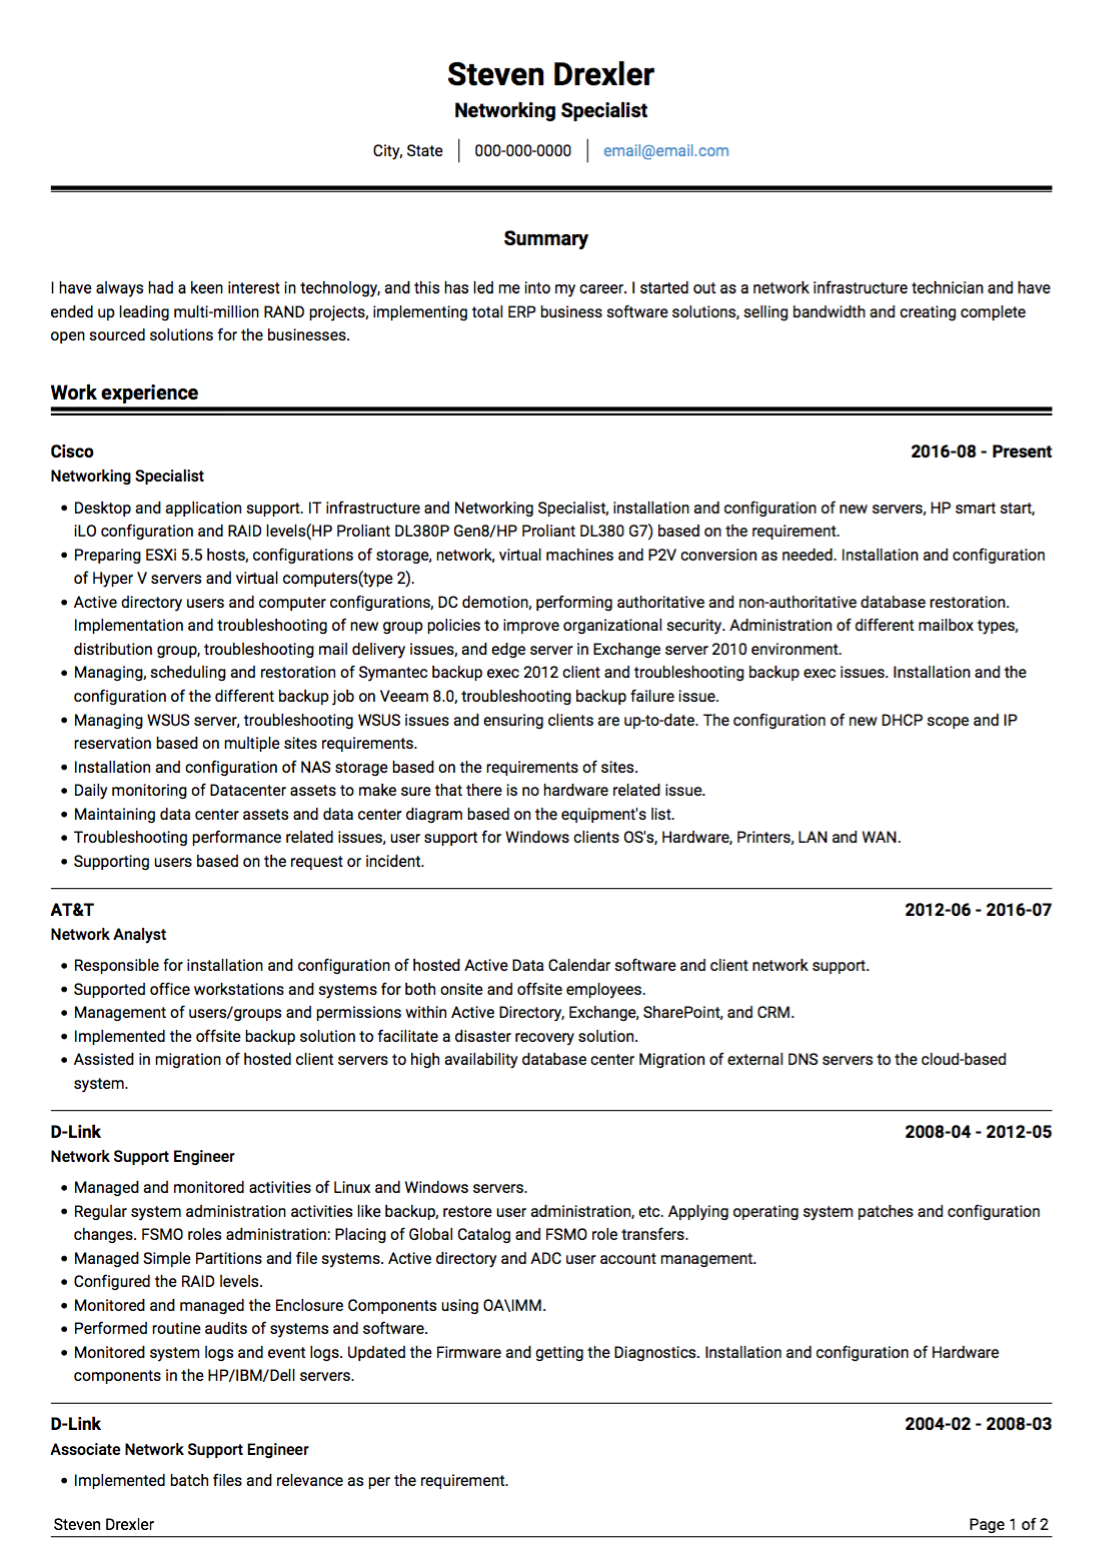 free downloaded ats resume template